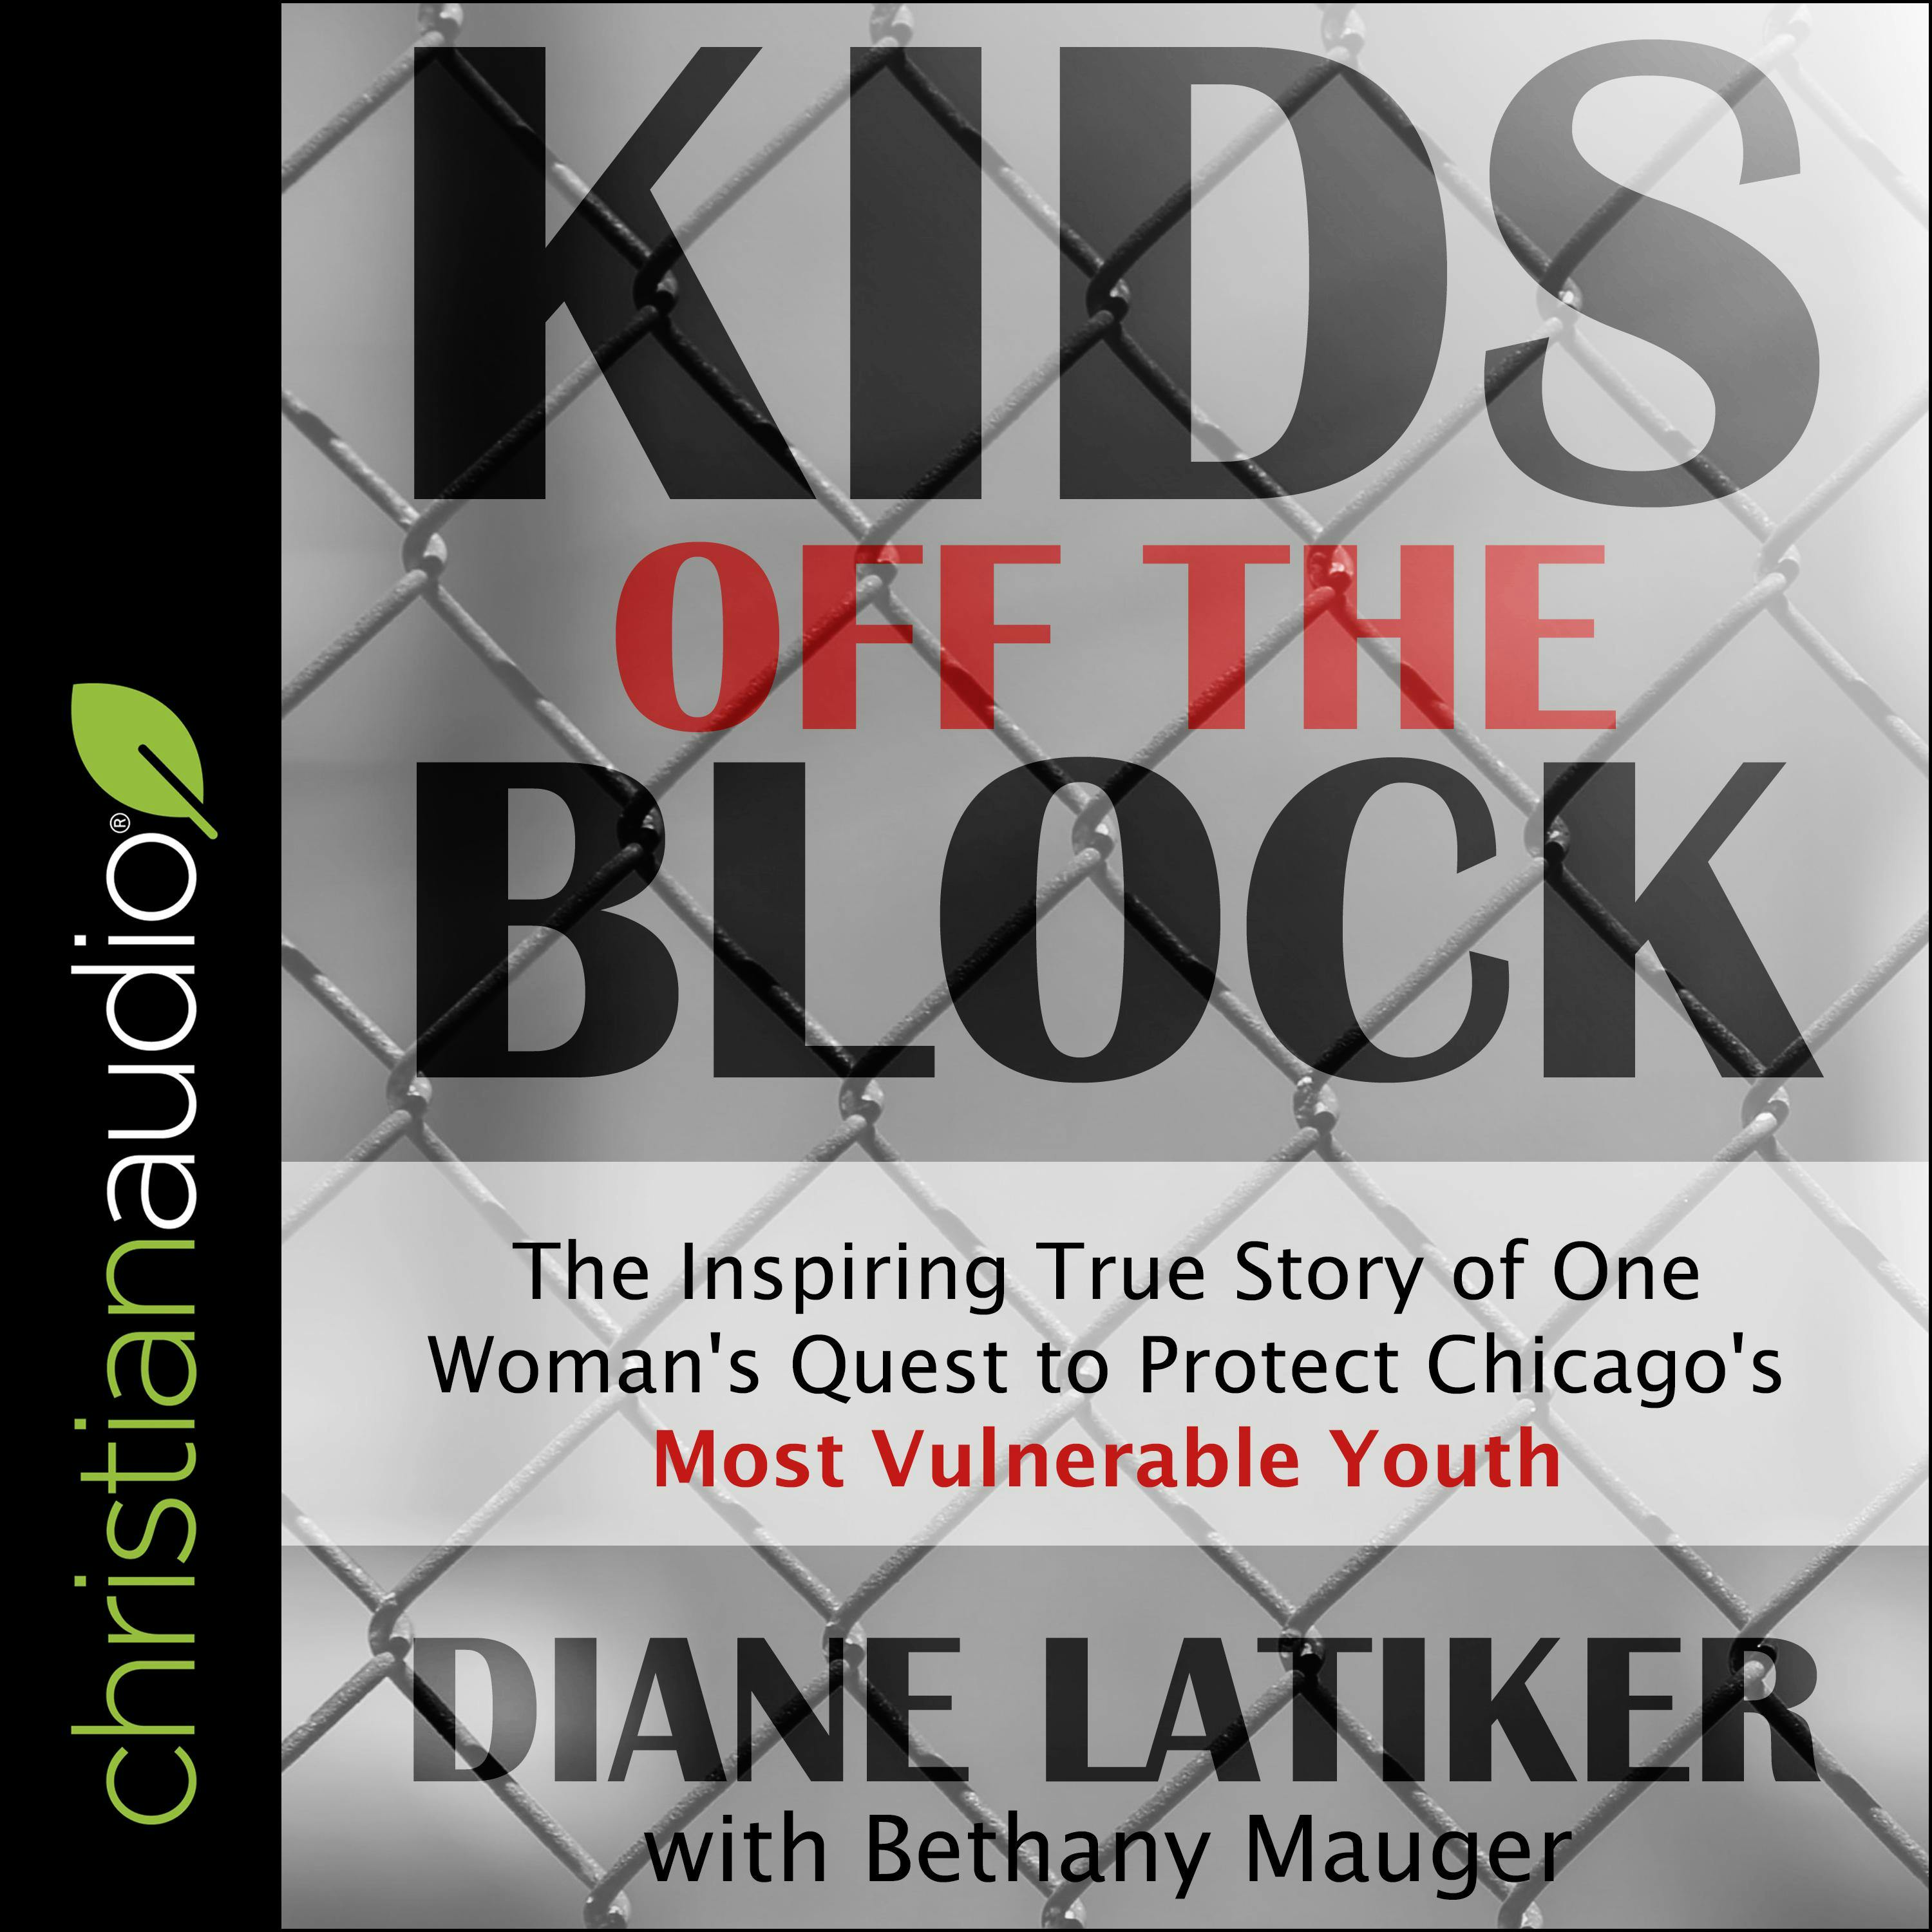 Kids Off the Block: The Inspiring True Story of One Woman's Quest to Protect Chicago's Most Vulnerable Youth - Bethany Mauger, Diane Latiker